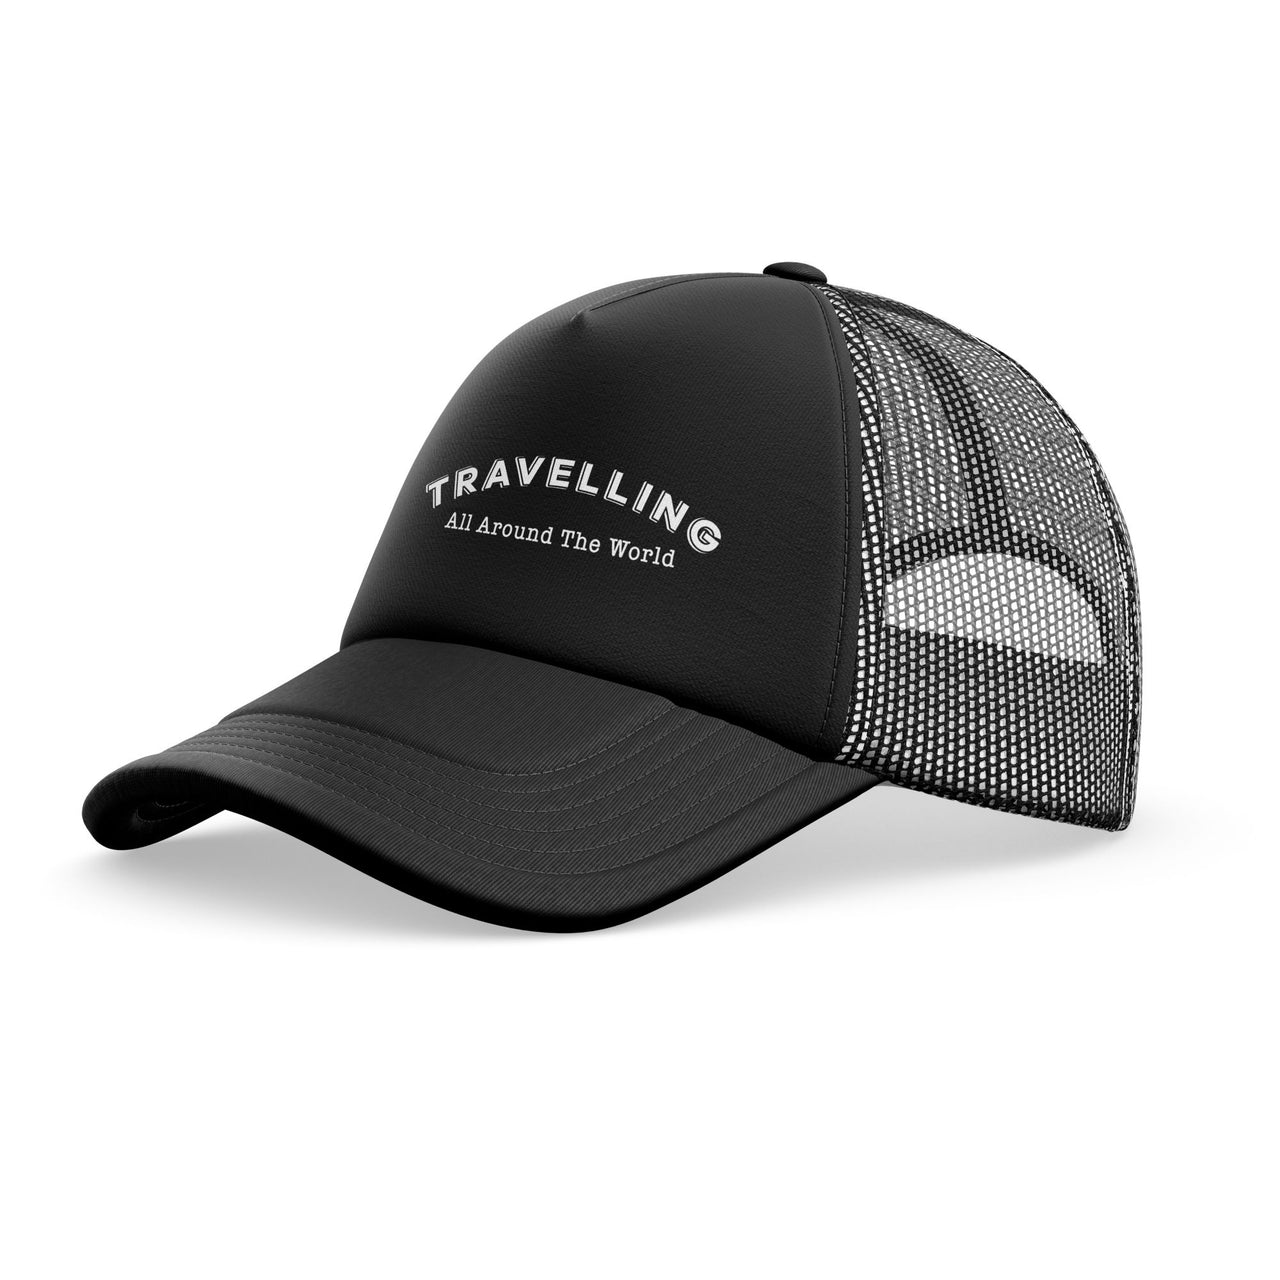 Travelling All Around The World Designed Trucker Caps & Hats